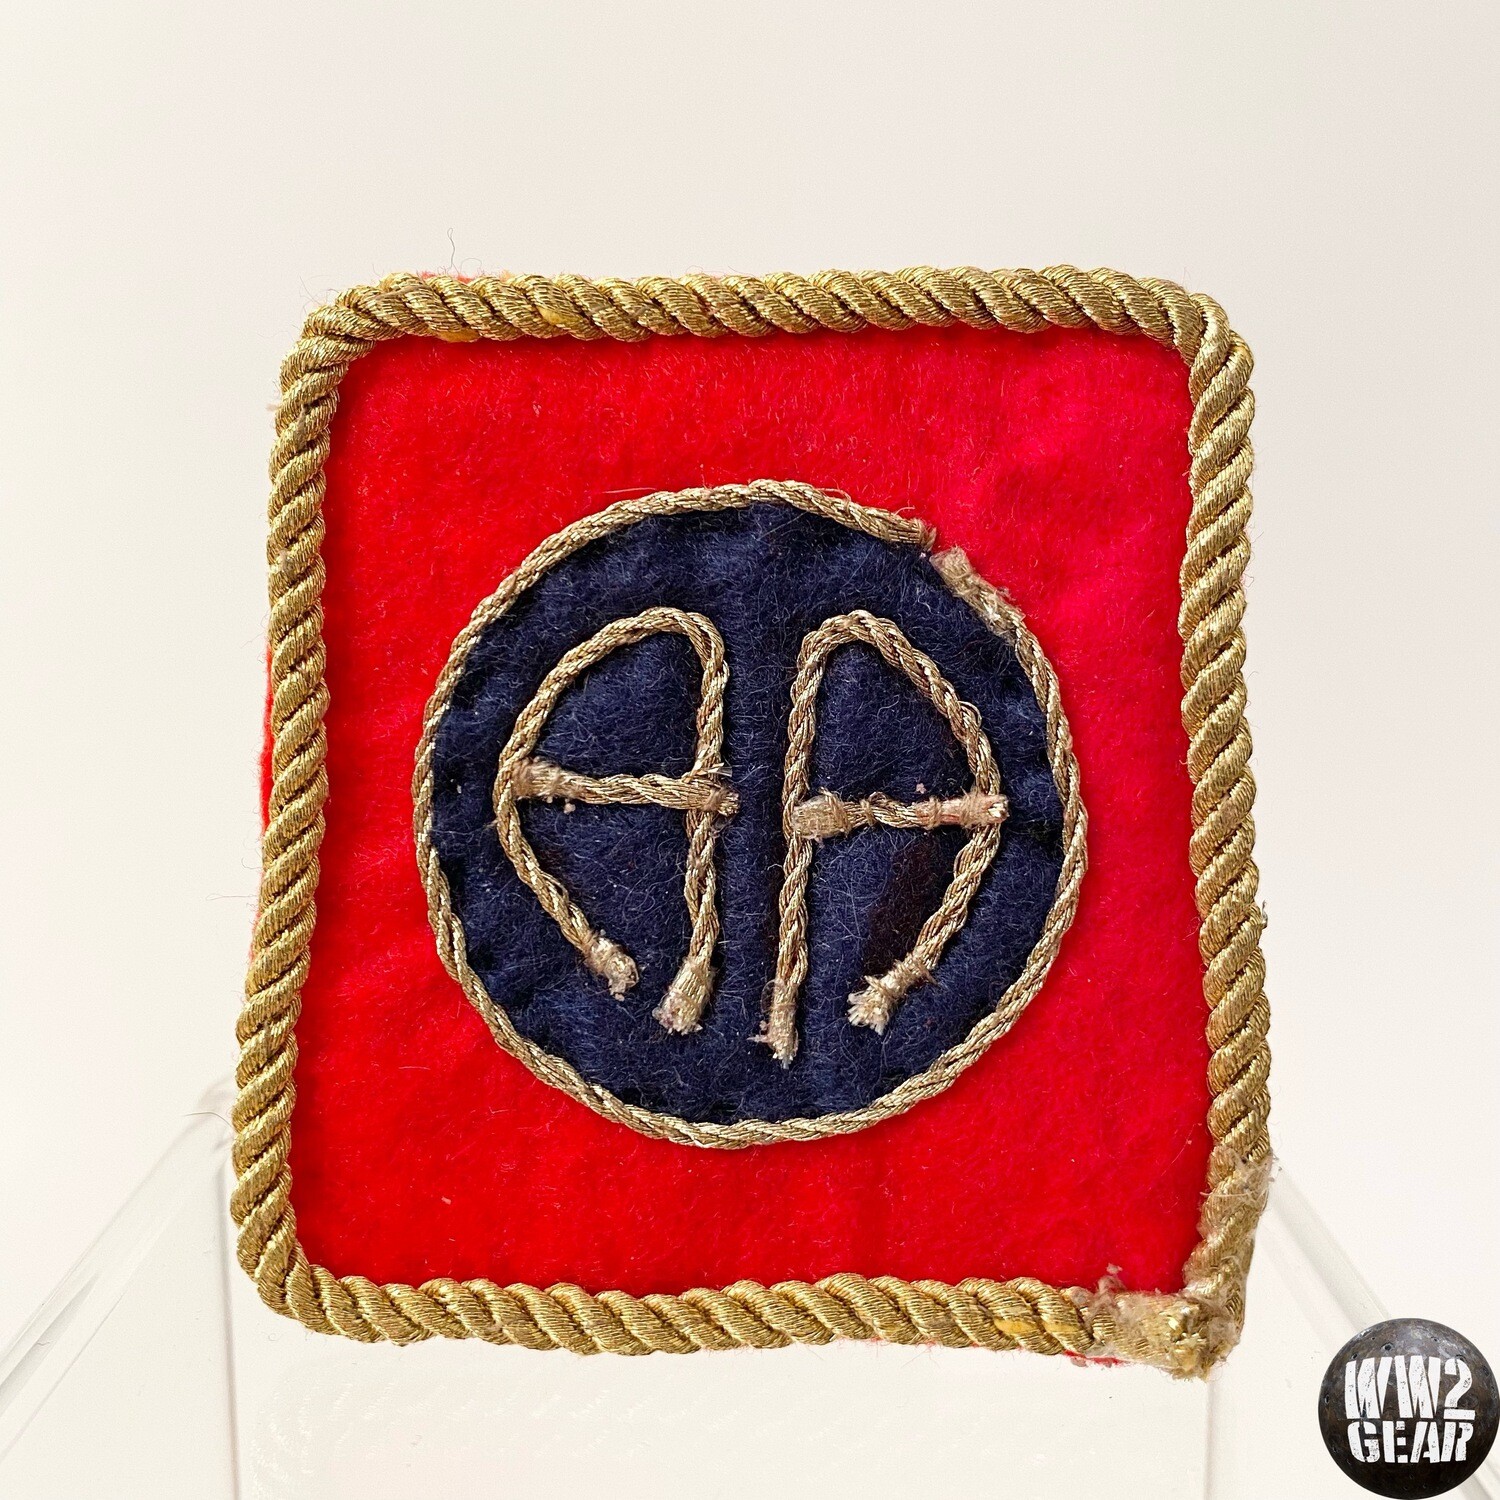 WW1 / 1920s US 82nd Airborne Handmade Shoulder Patch (reproduction)